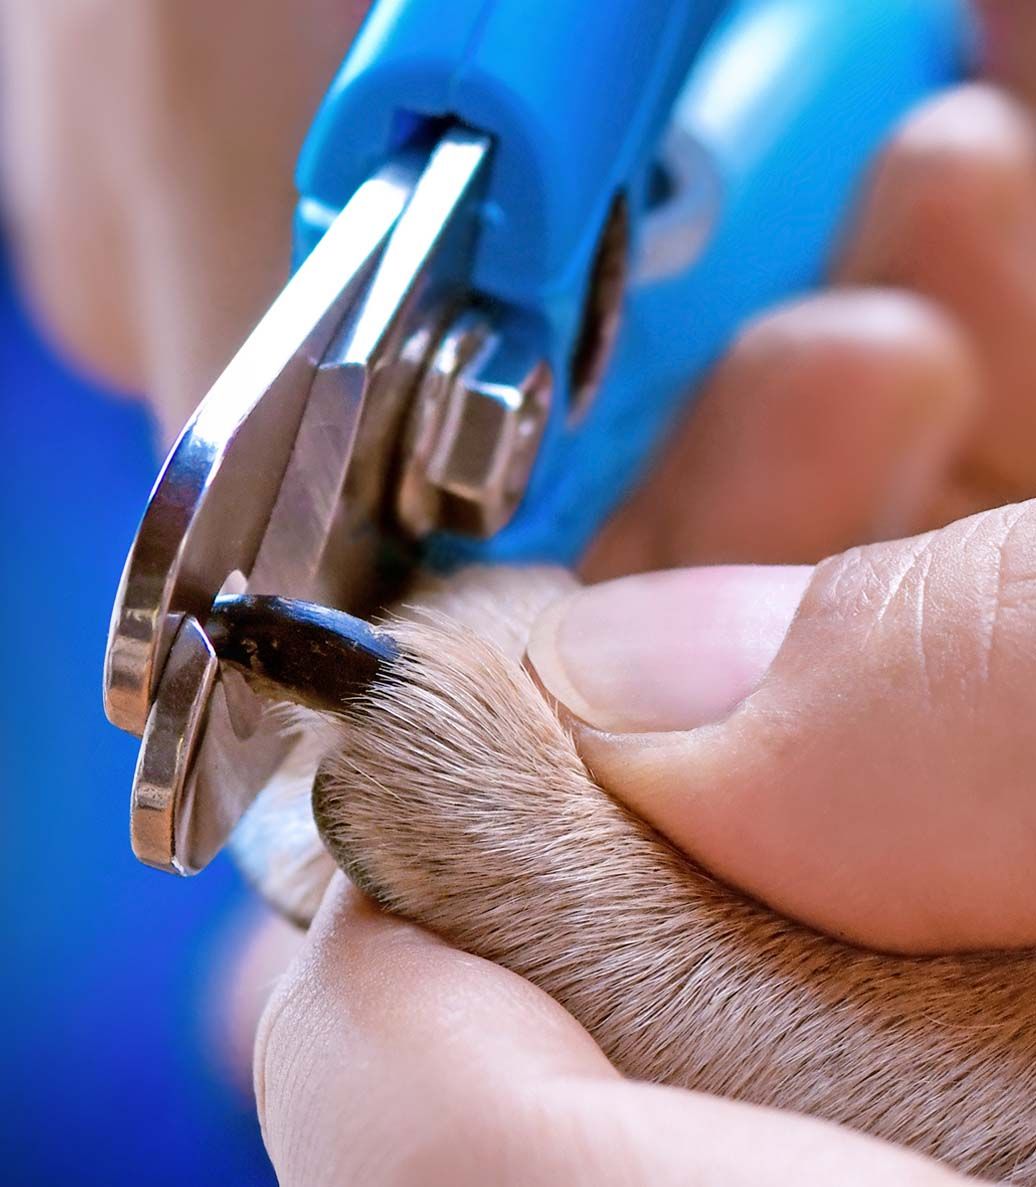 What happens and what to do when the dog nail scrathes you?